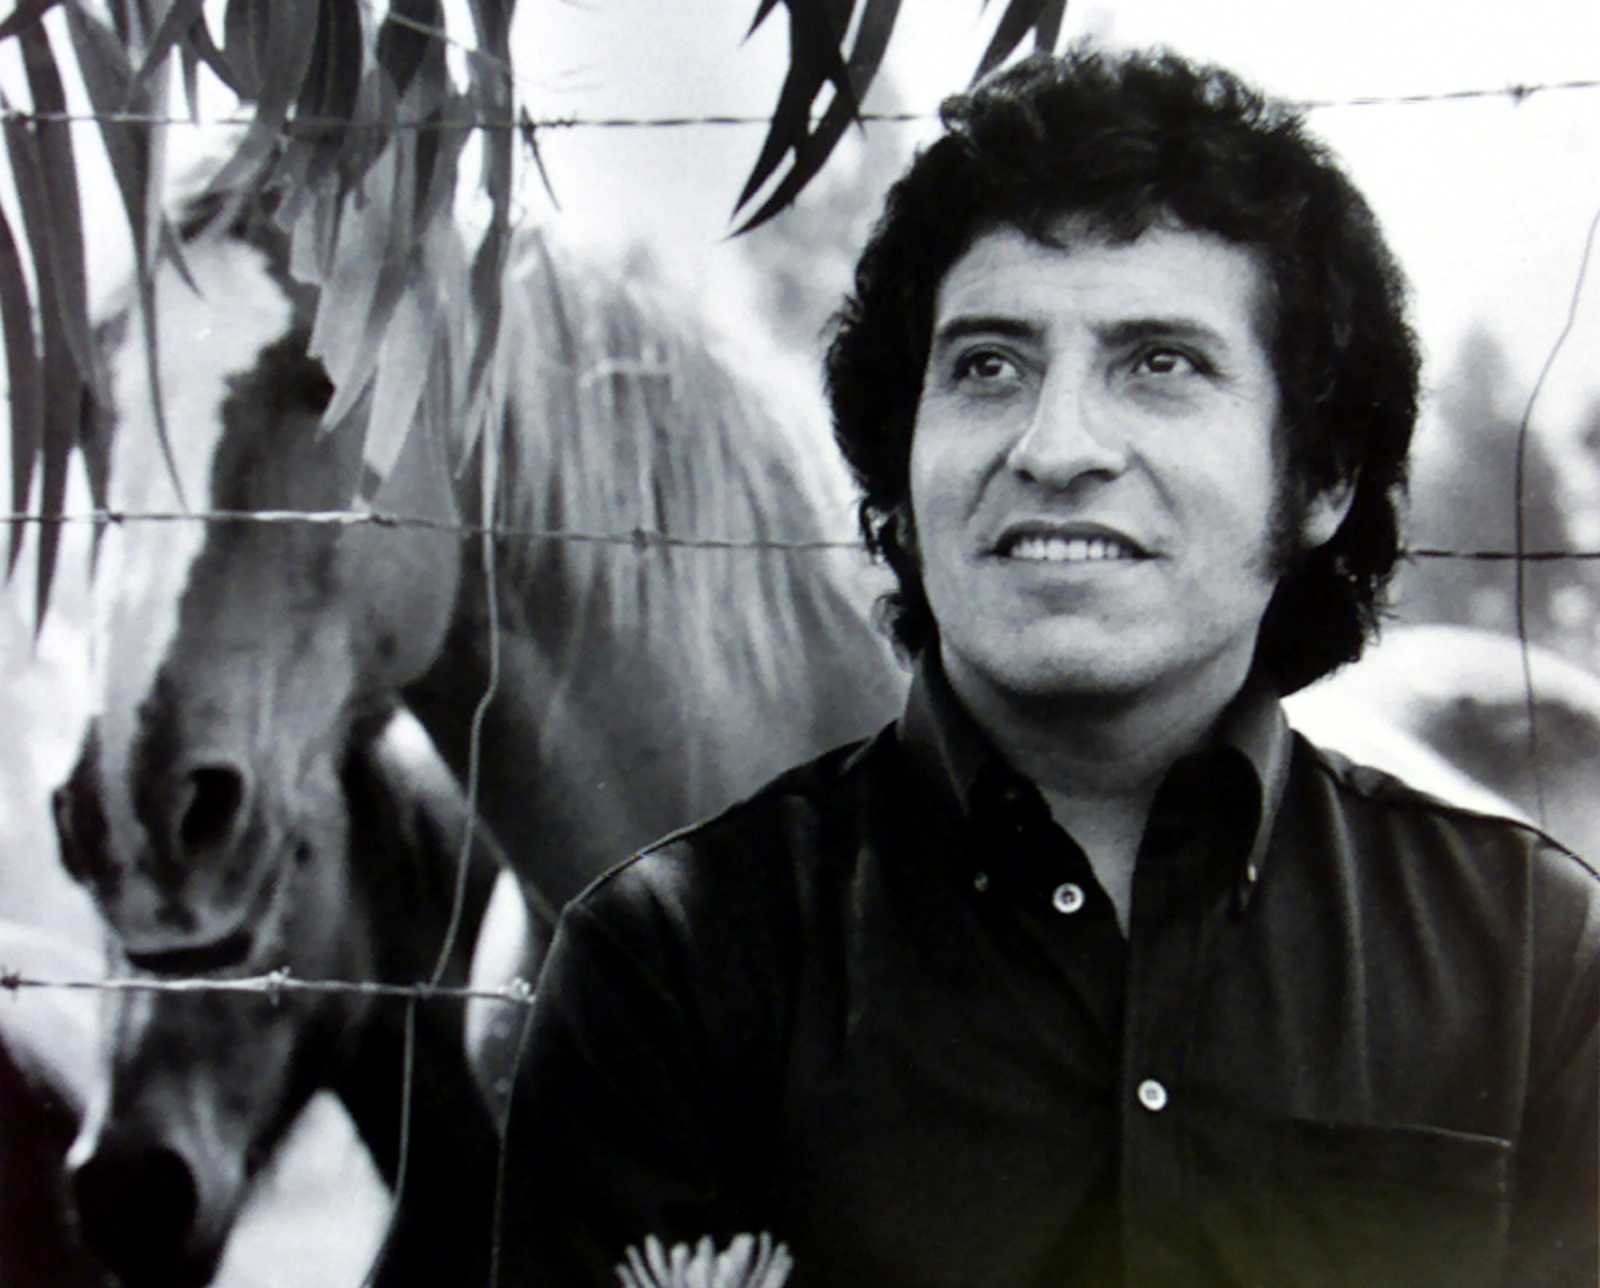 Florida jury found retired Chile officer responsible for death of Victor Jara